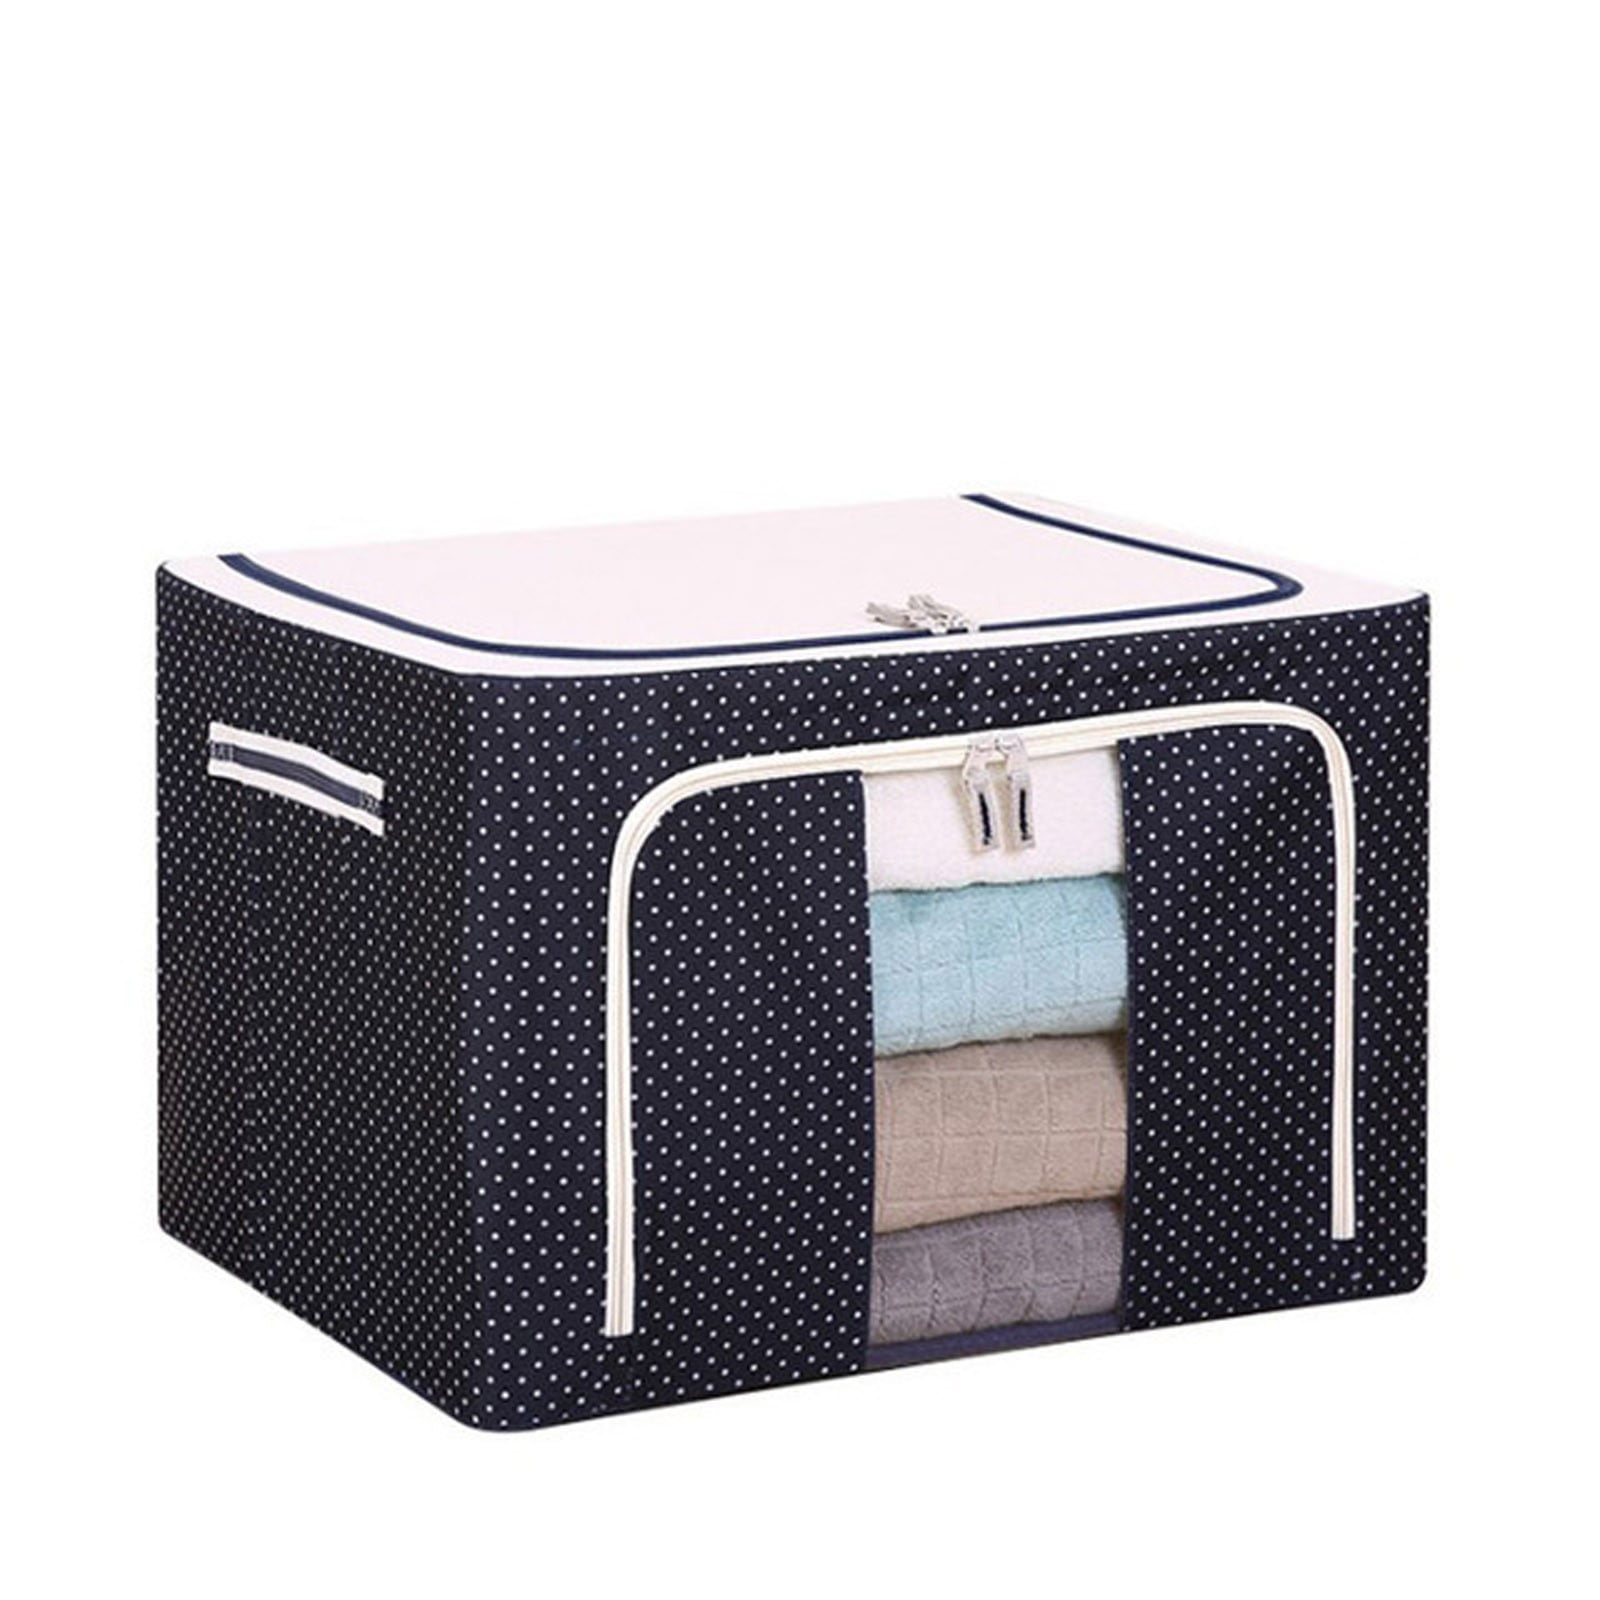 Details about   Laundry Basket Divider Foldable Waterproof Clothes Storage Bag Container Coffee 